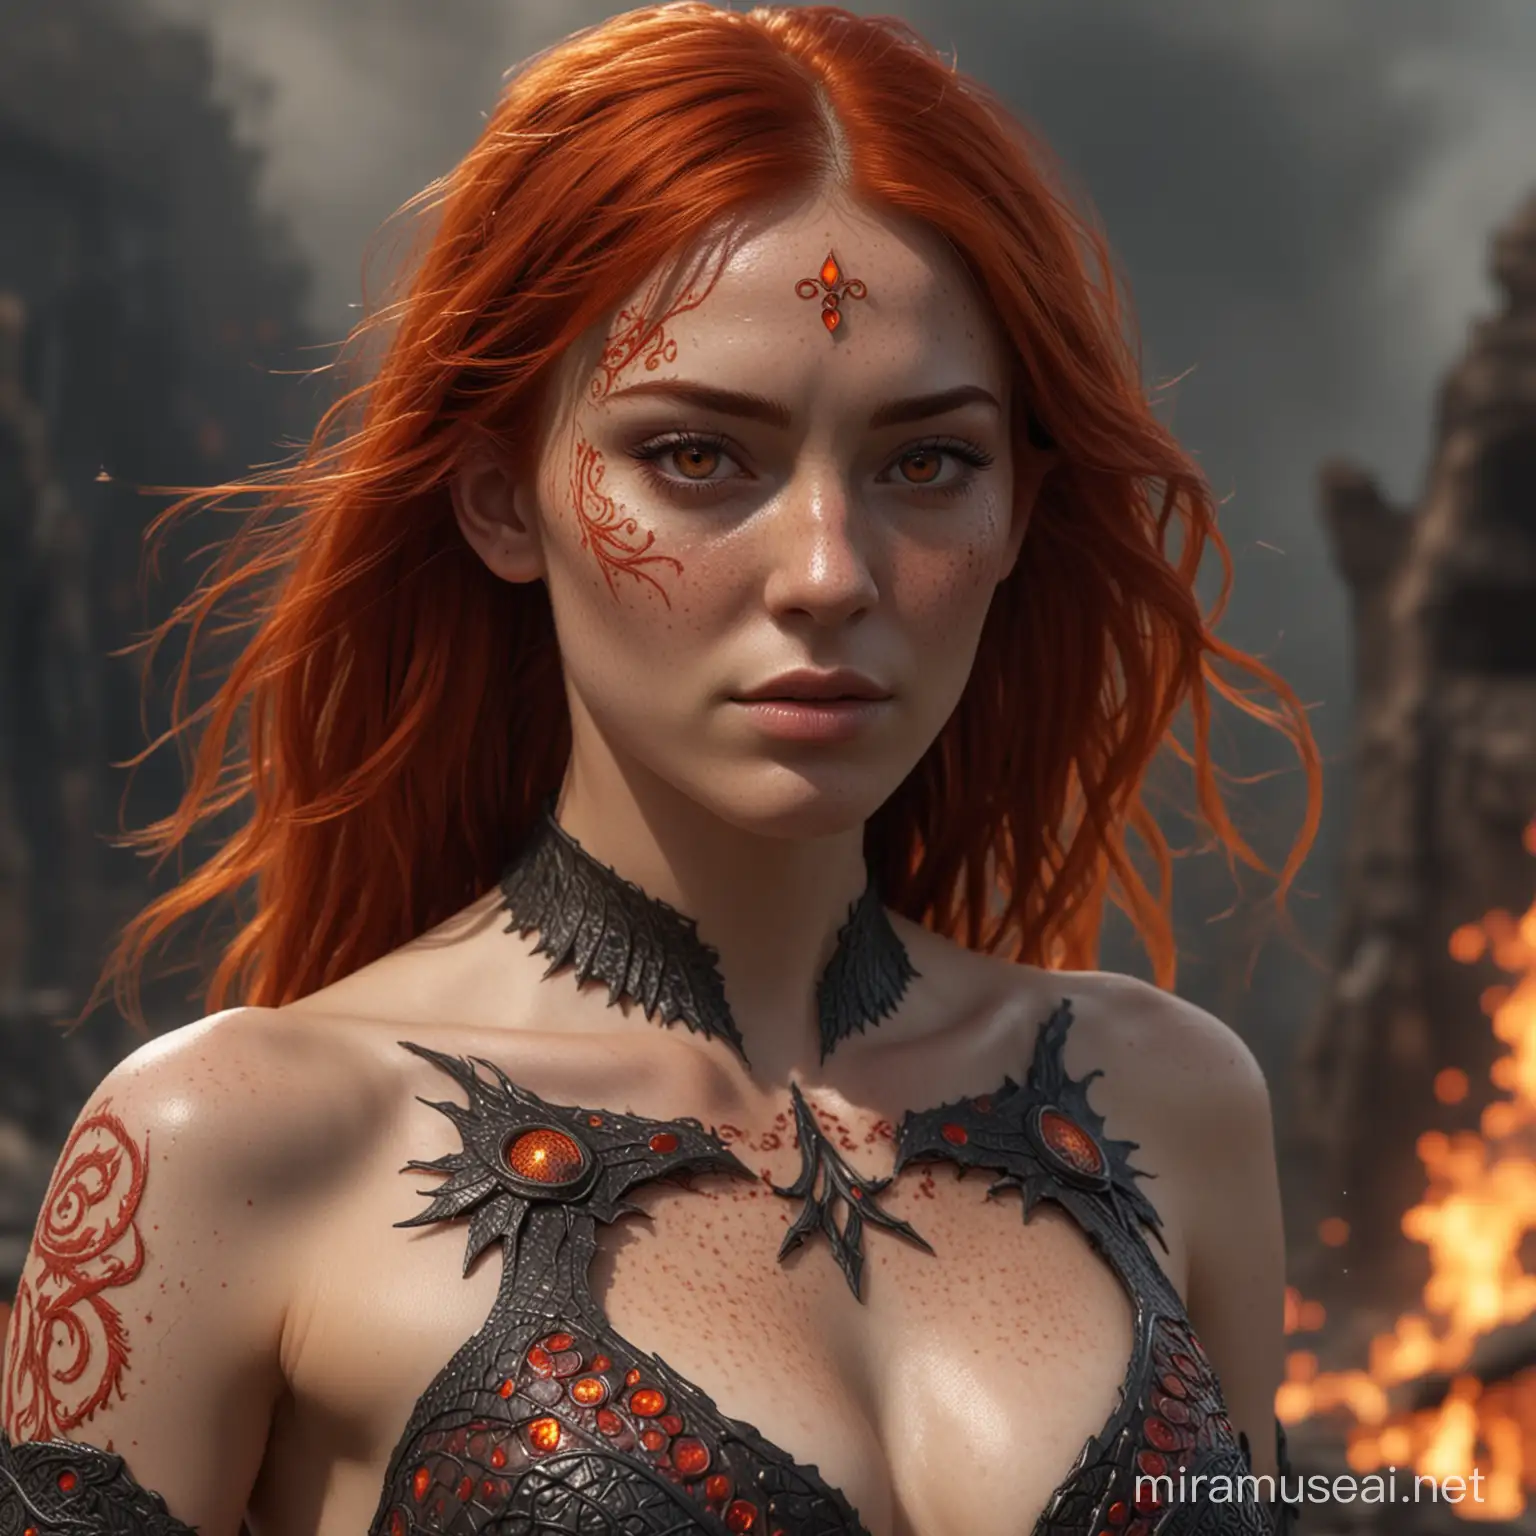 Fiery RedHaired Woman with Dragon Symbol Tattoos and Scale Top